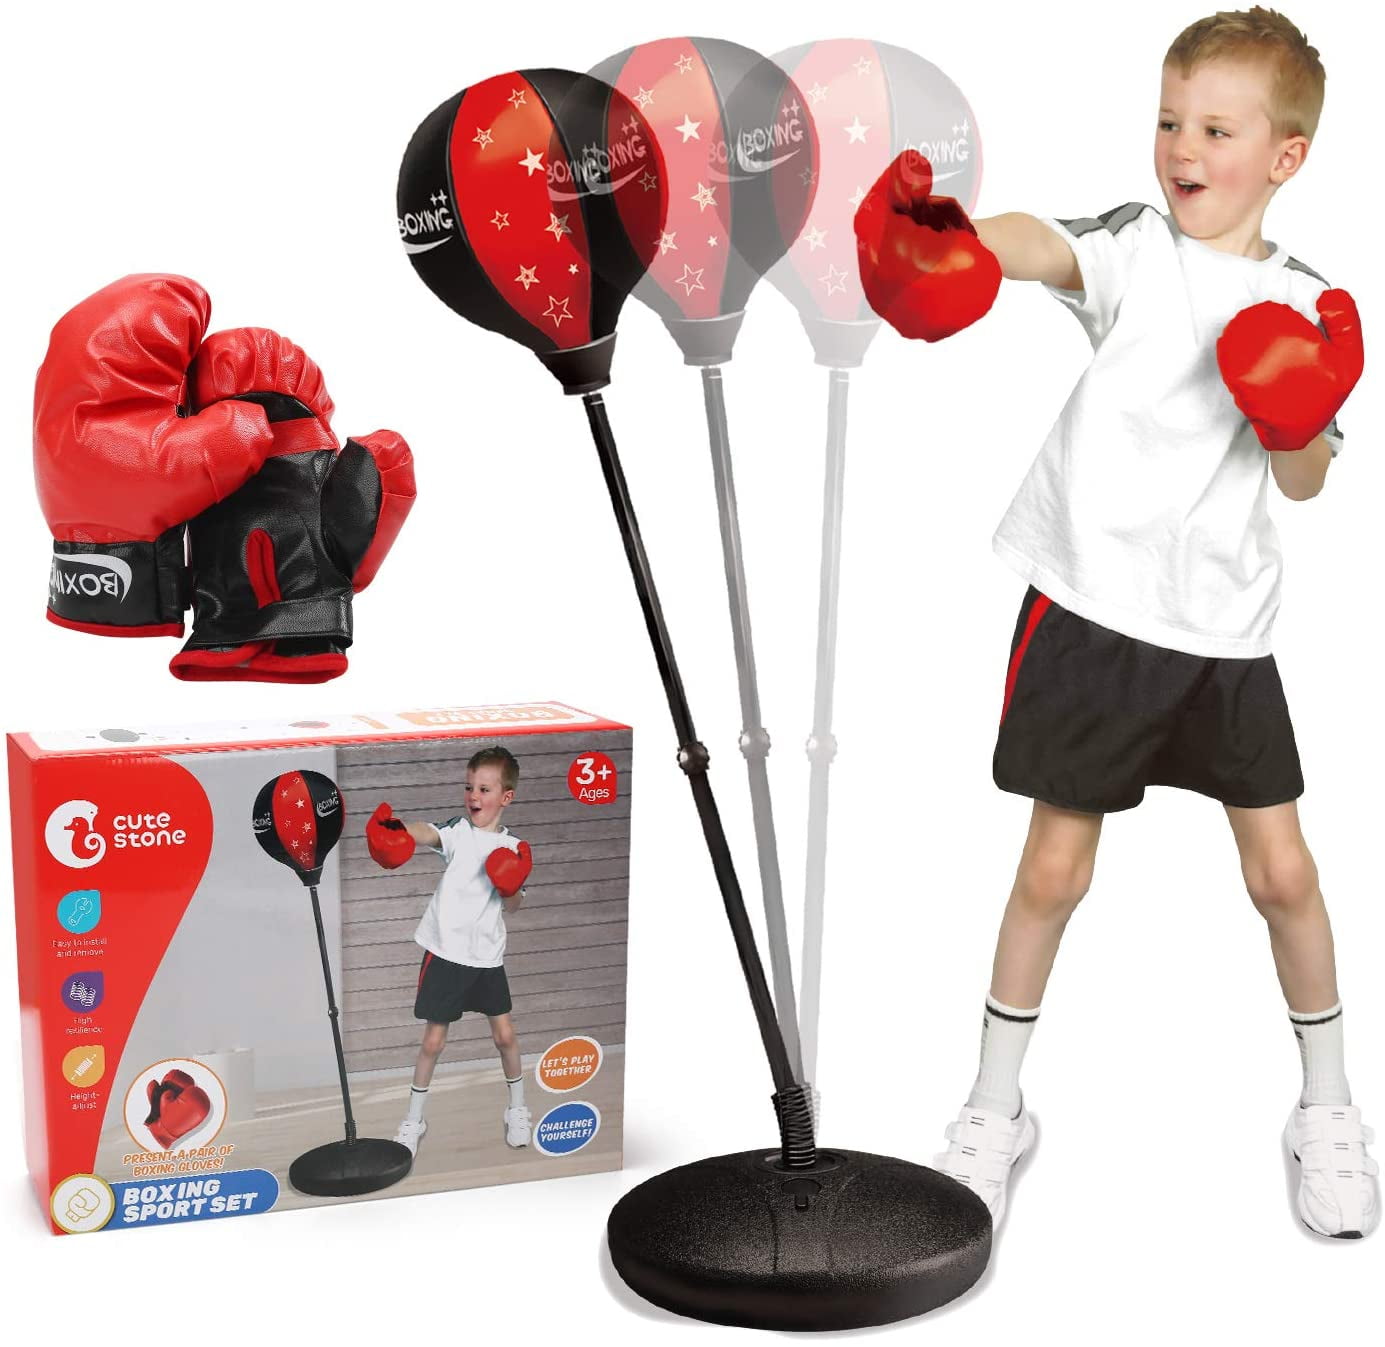 DURABLE PUNCH BAG BALL AND MITTS GLOVES KIT BOXING GIFT SET FOR KIDS FREE STAND 